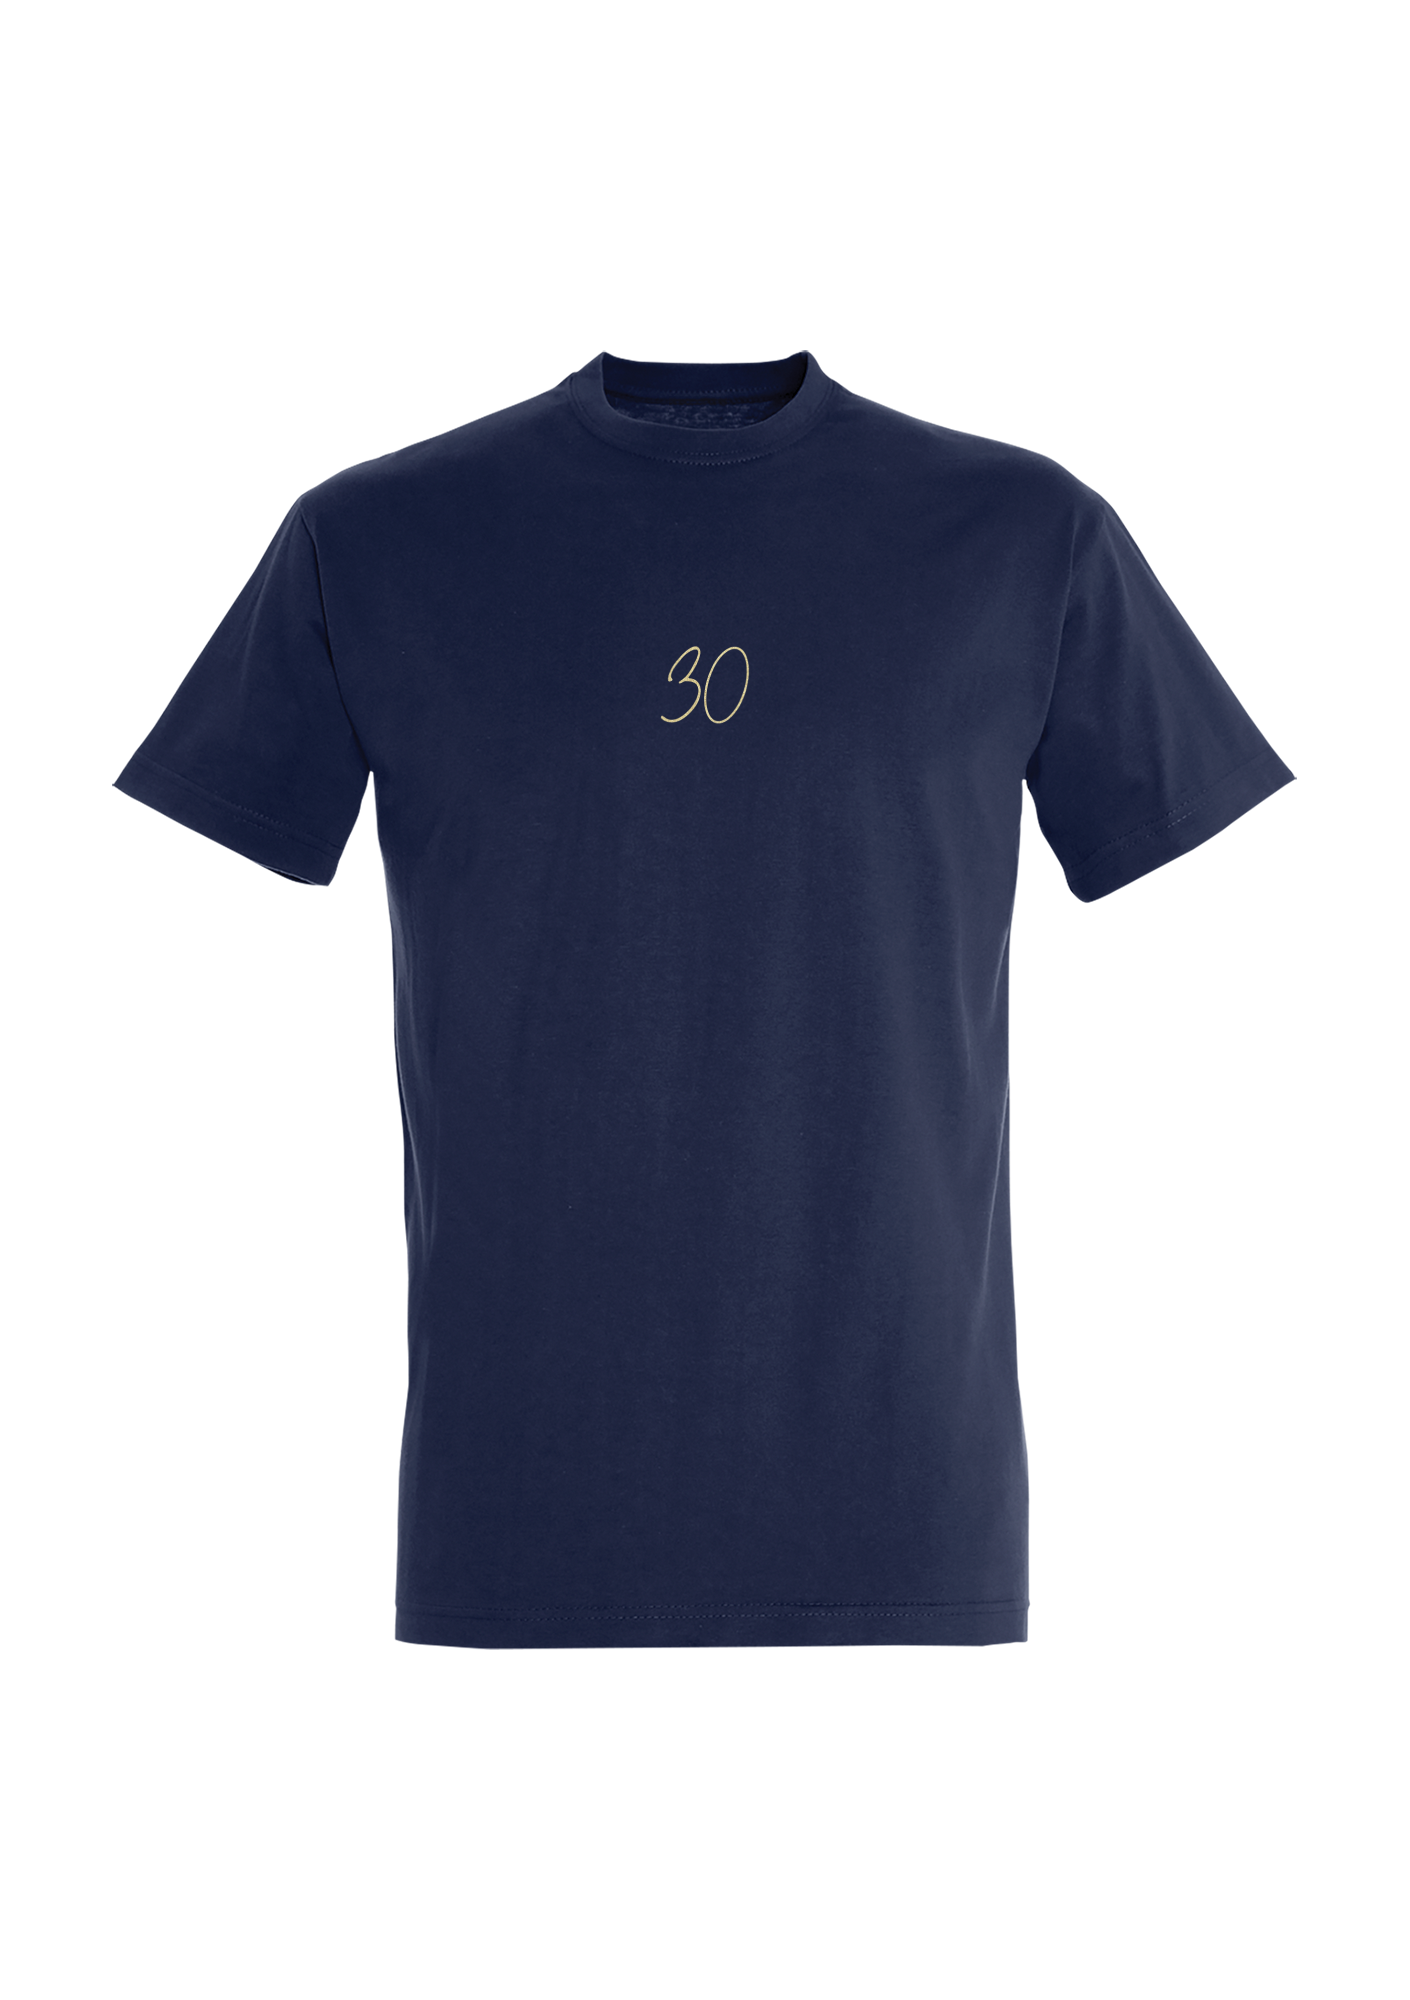 T-shirt Adulte premium "Thirty Years Gold" navy - 76-IMPERIAL30ANSORFACE